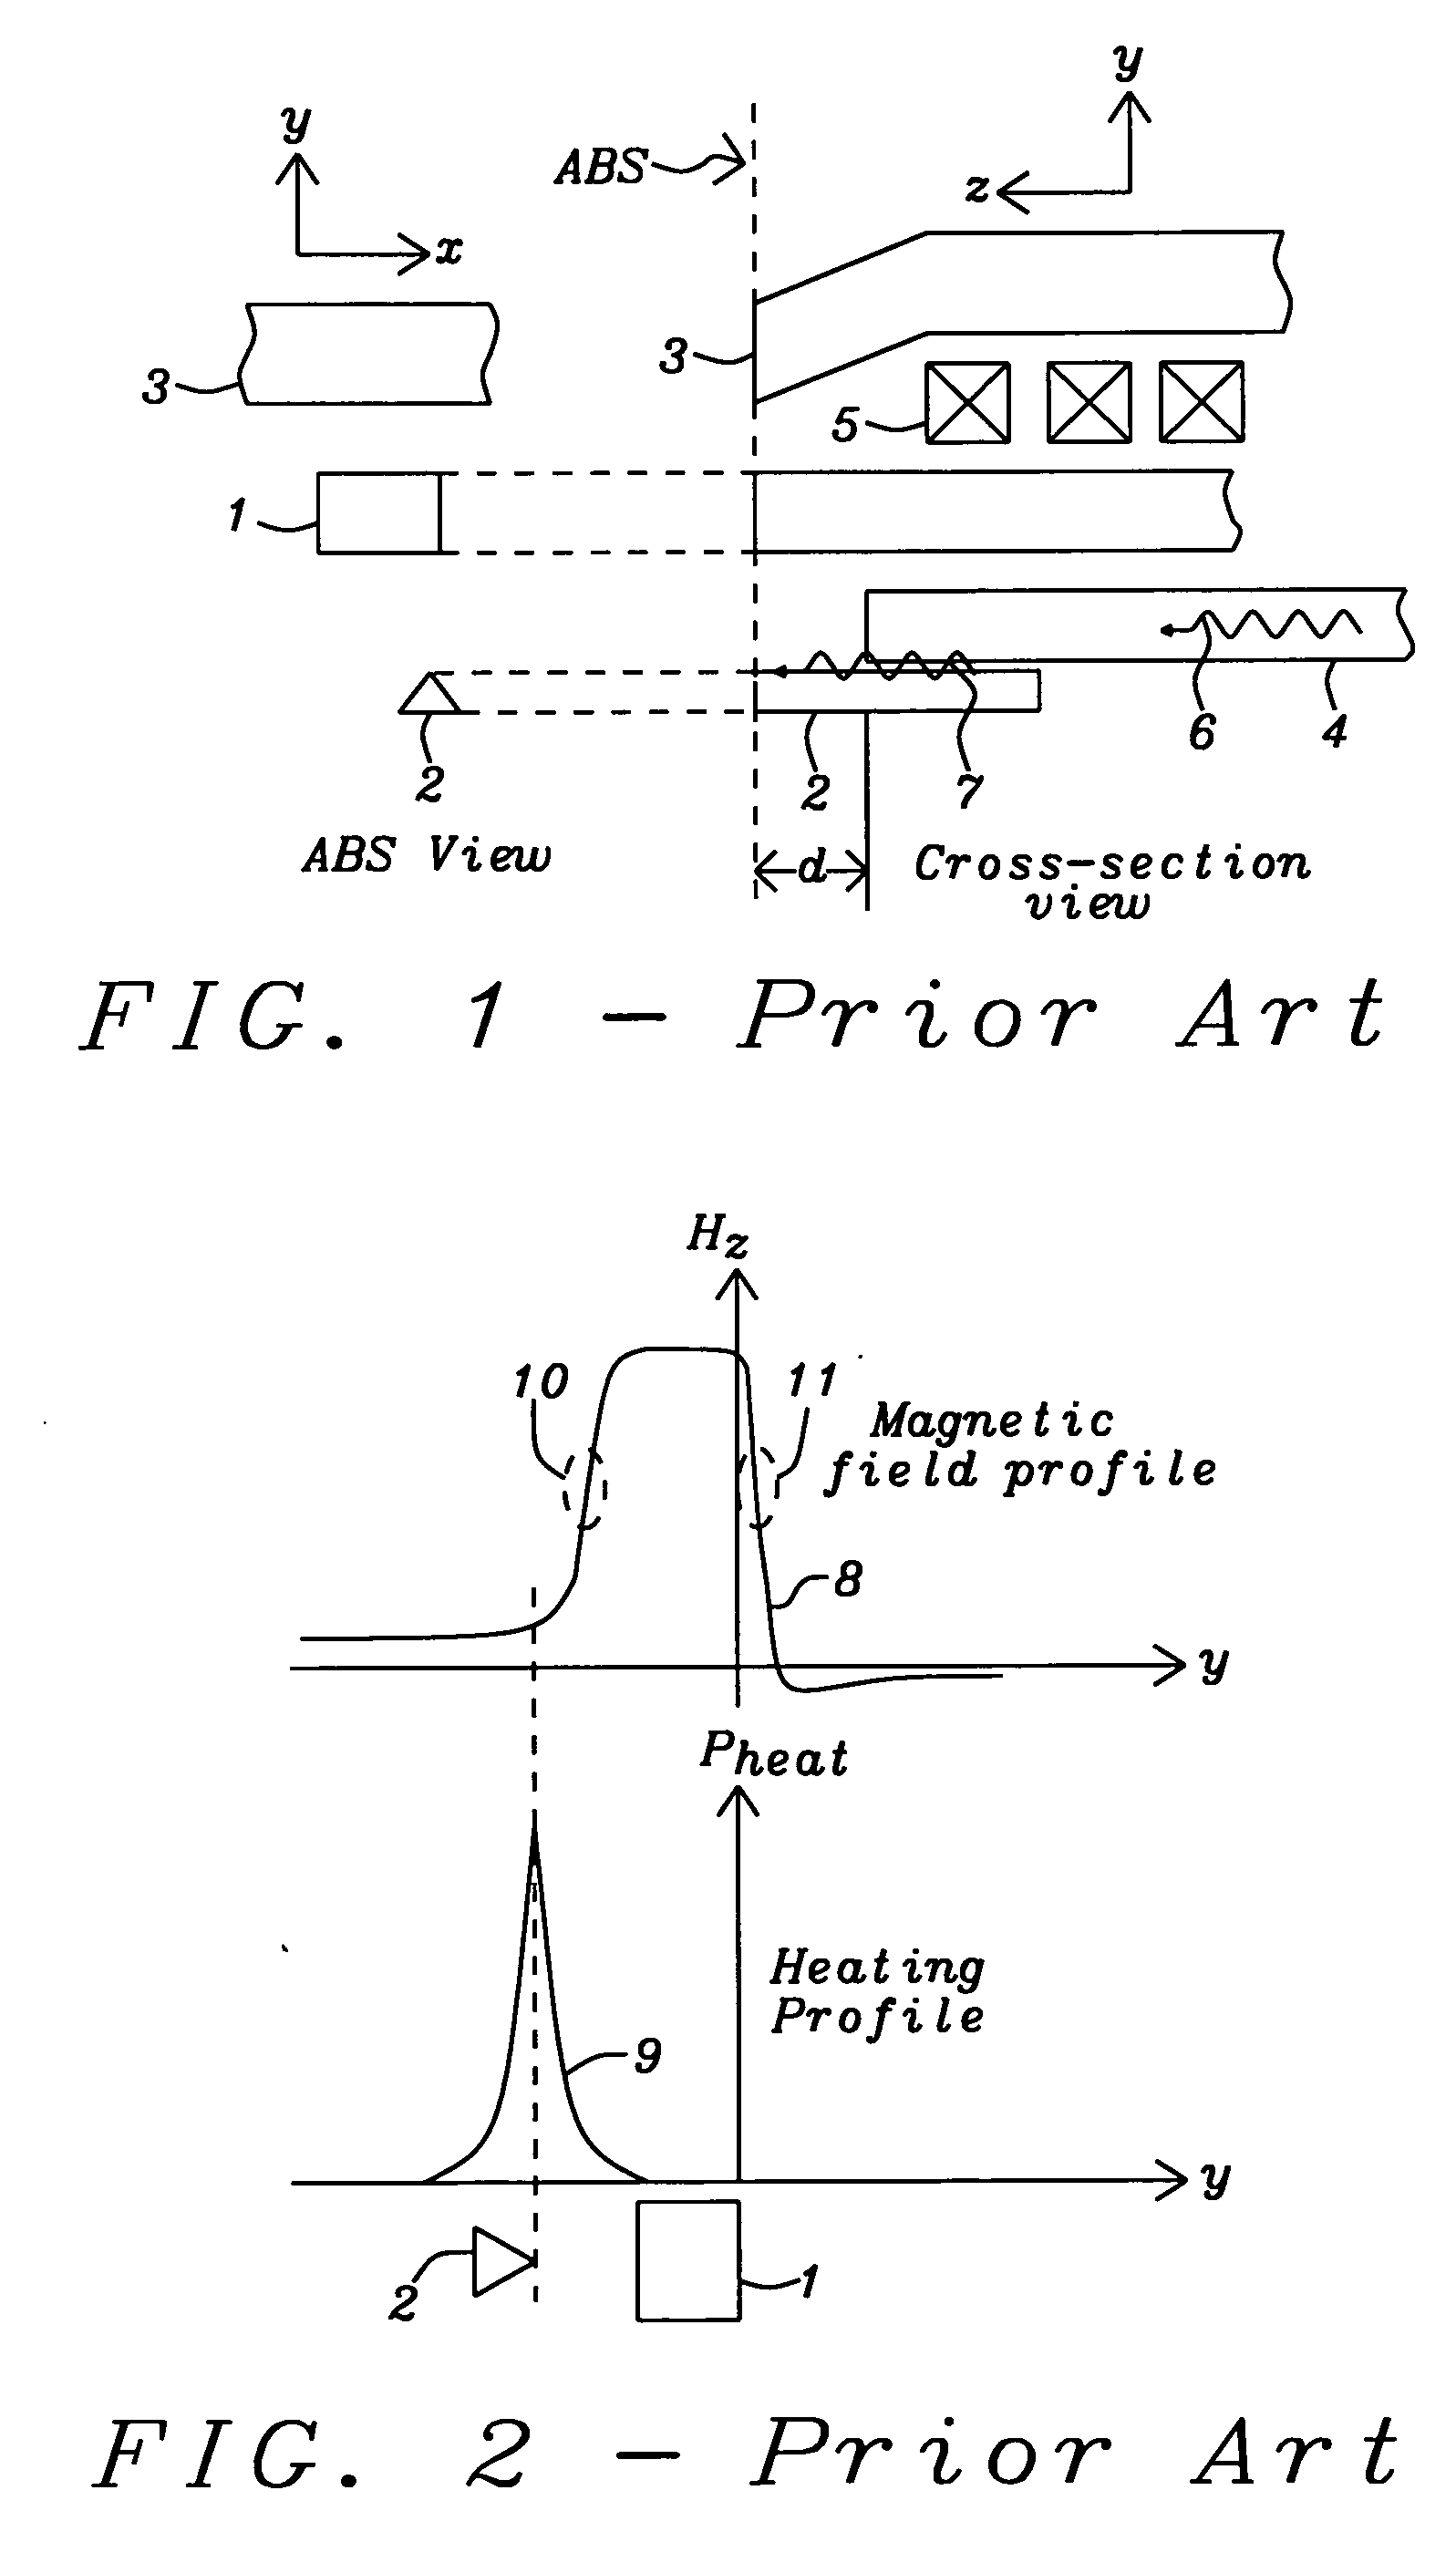 Plasmon antenna with magnetic core for thermally assisted magnetic recording